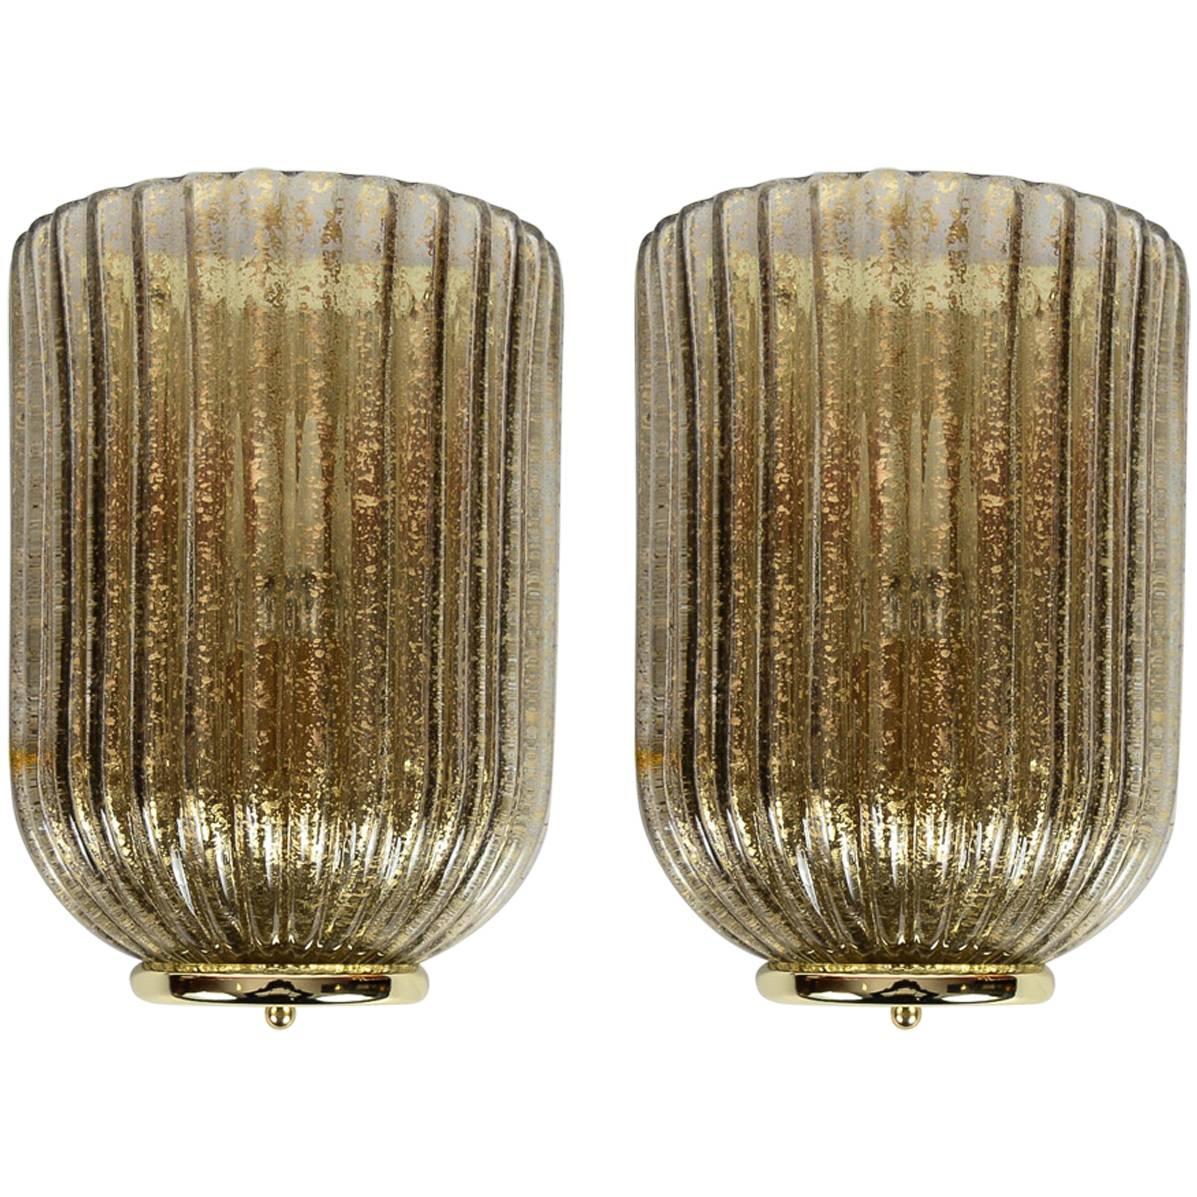 Pair of Murano Glass Sconces in the Style of Séguso